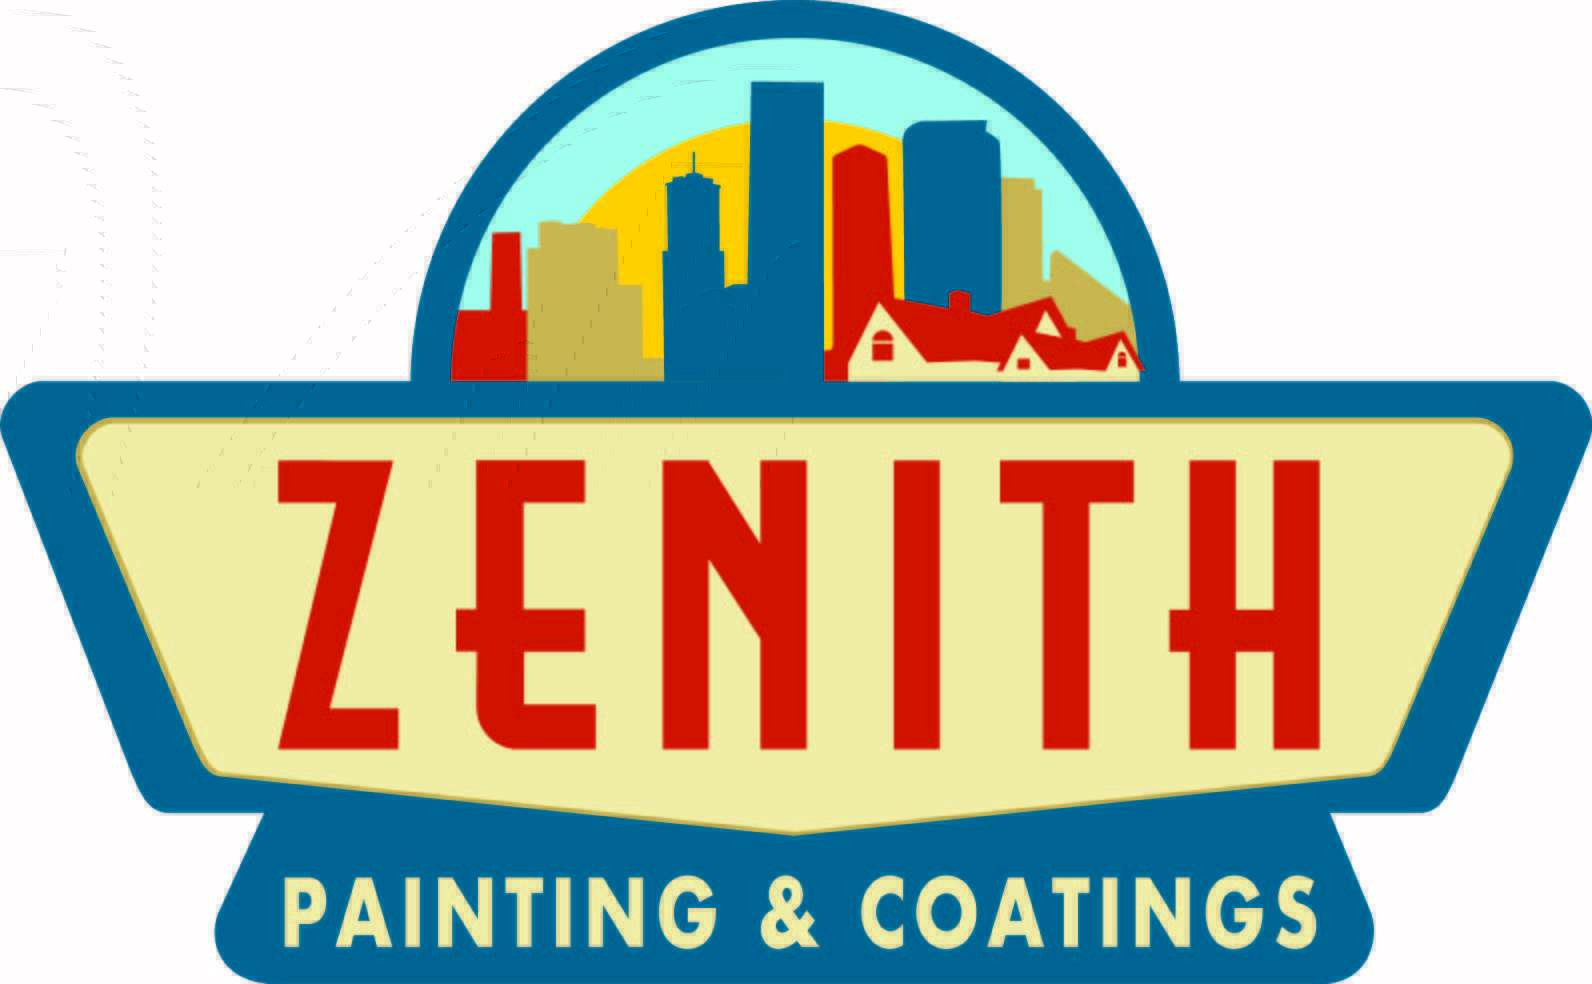 Zenith Painting and Coatings Logo